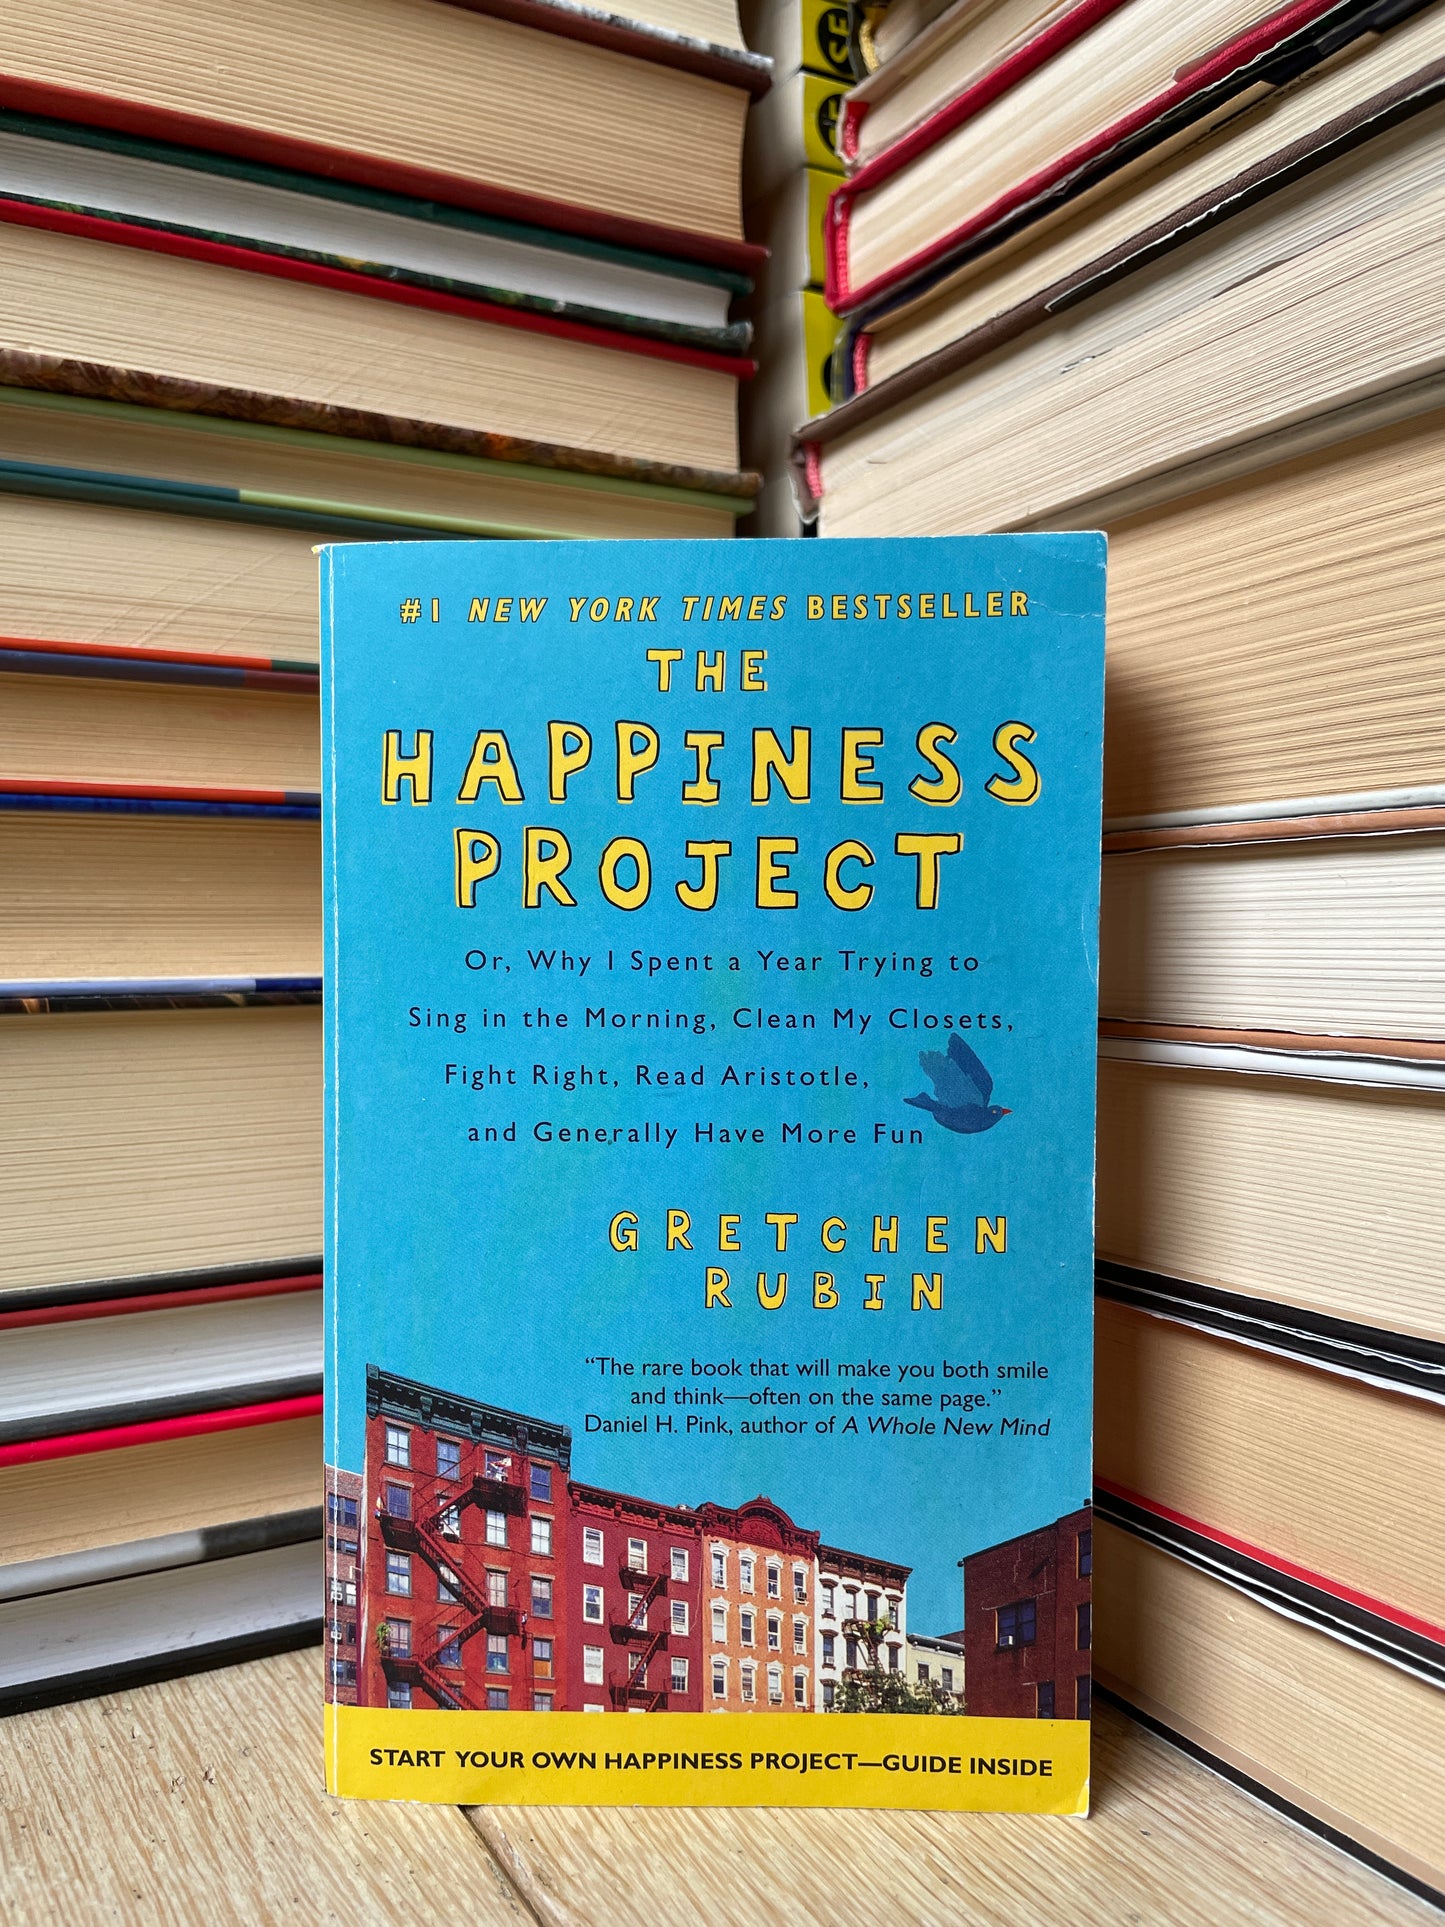 Gretchen Rubin - The Happiness Project